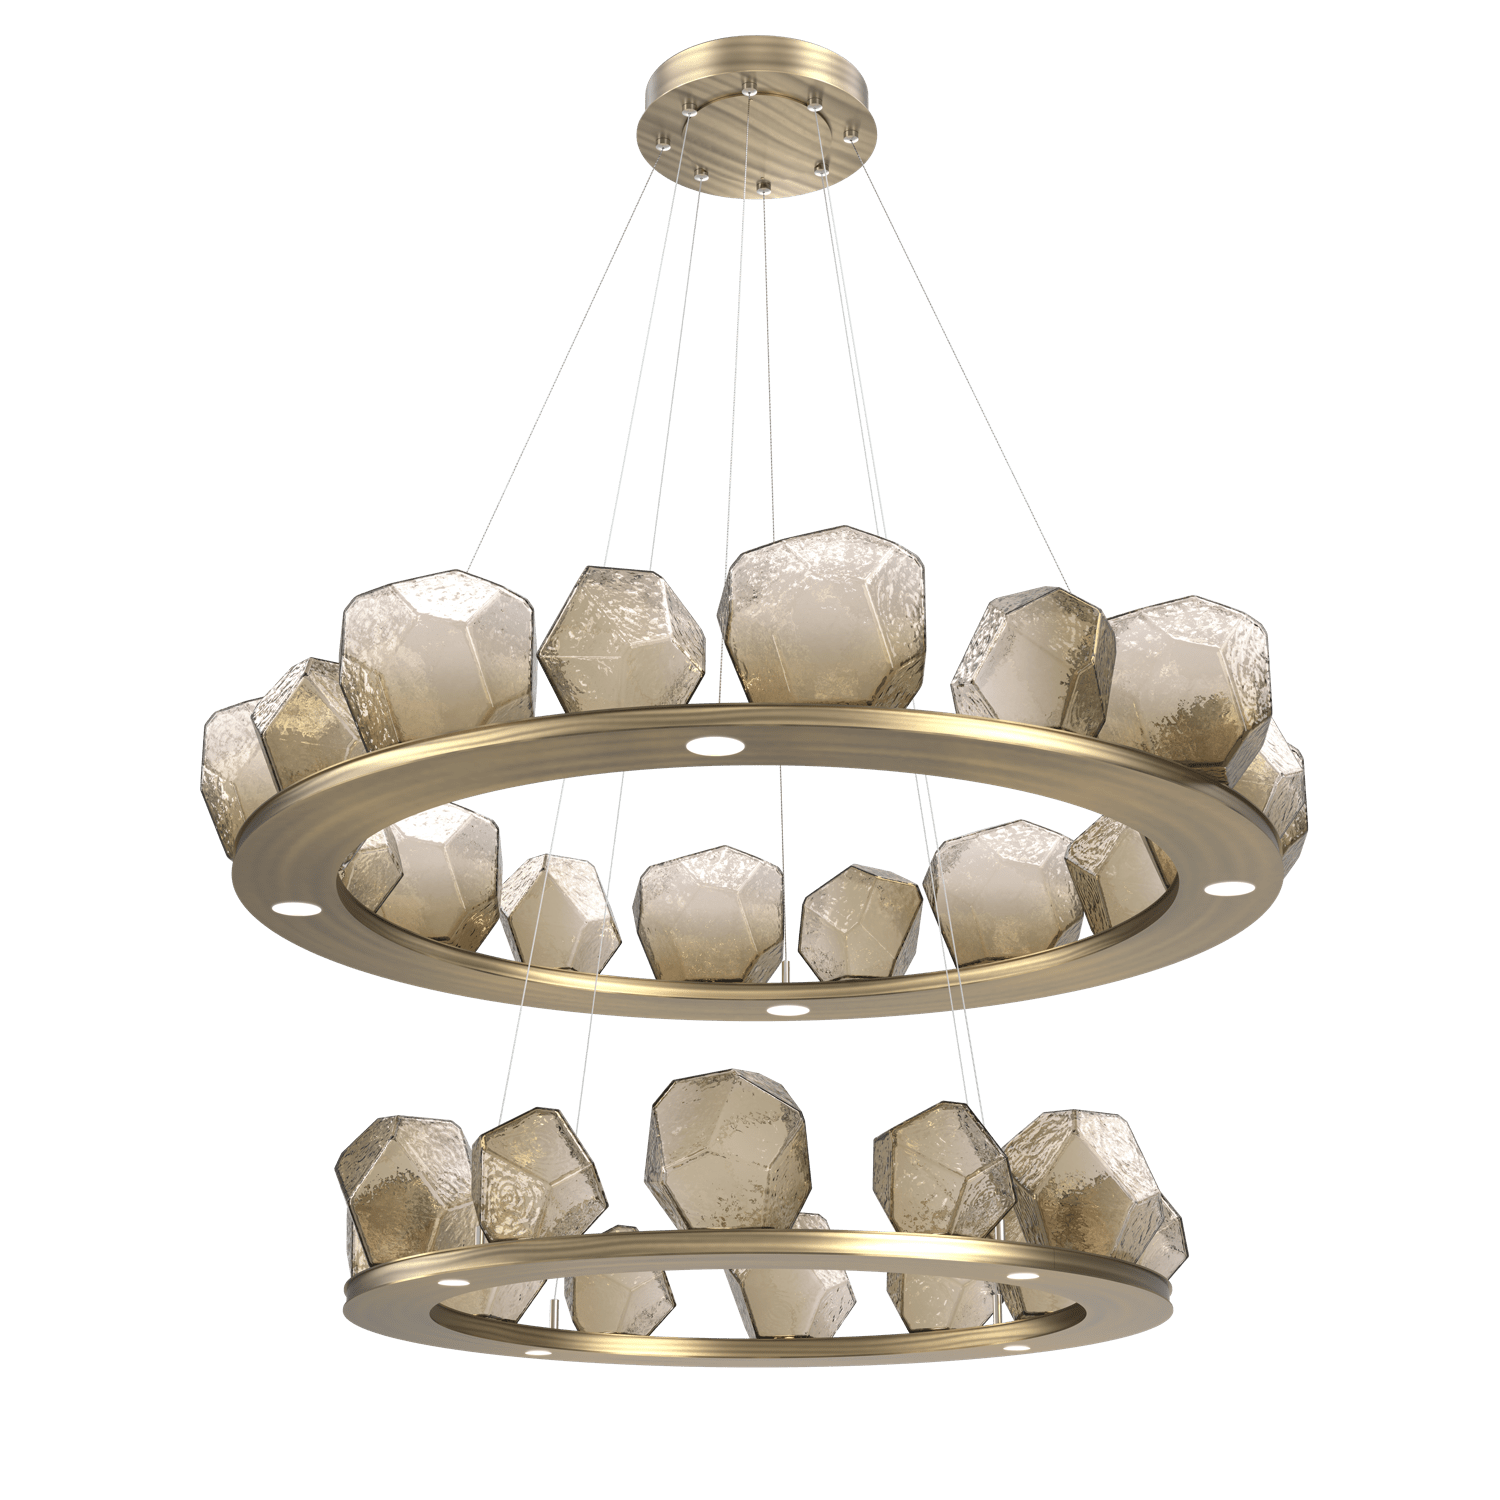 CHB0039-2B-HB-B-Hammerton-Studio-Gem-48-inch-two-tier-ring-chandelier-with-heritage-brass-finish-and-bronze-blown-glass-shades-and-LED-lamping